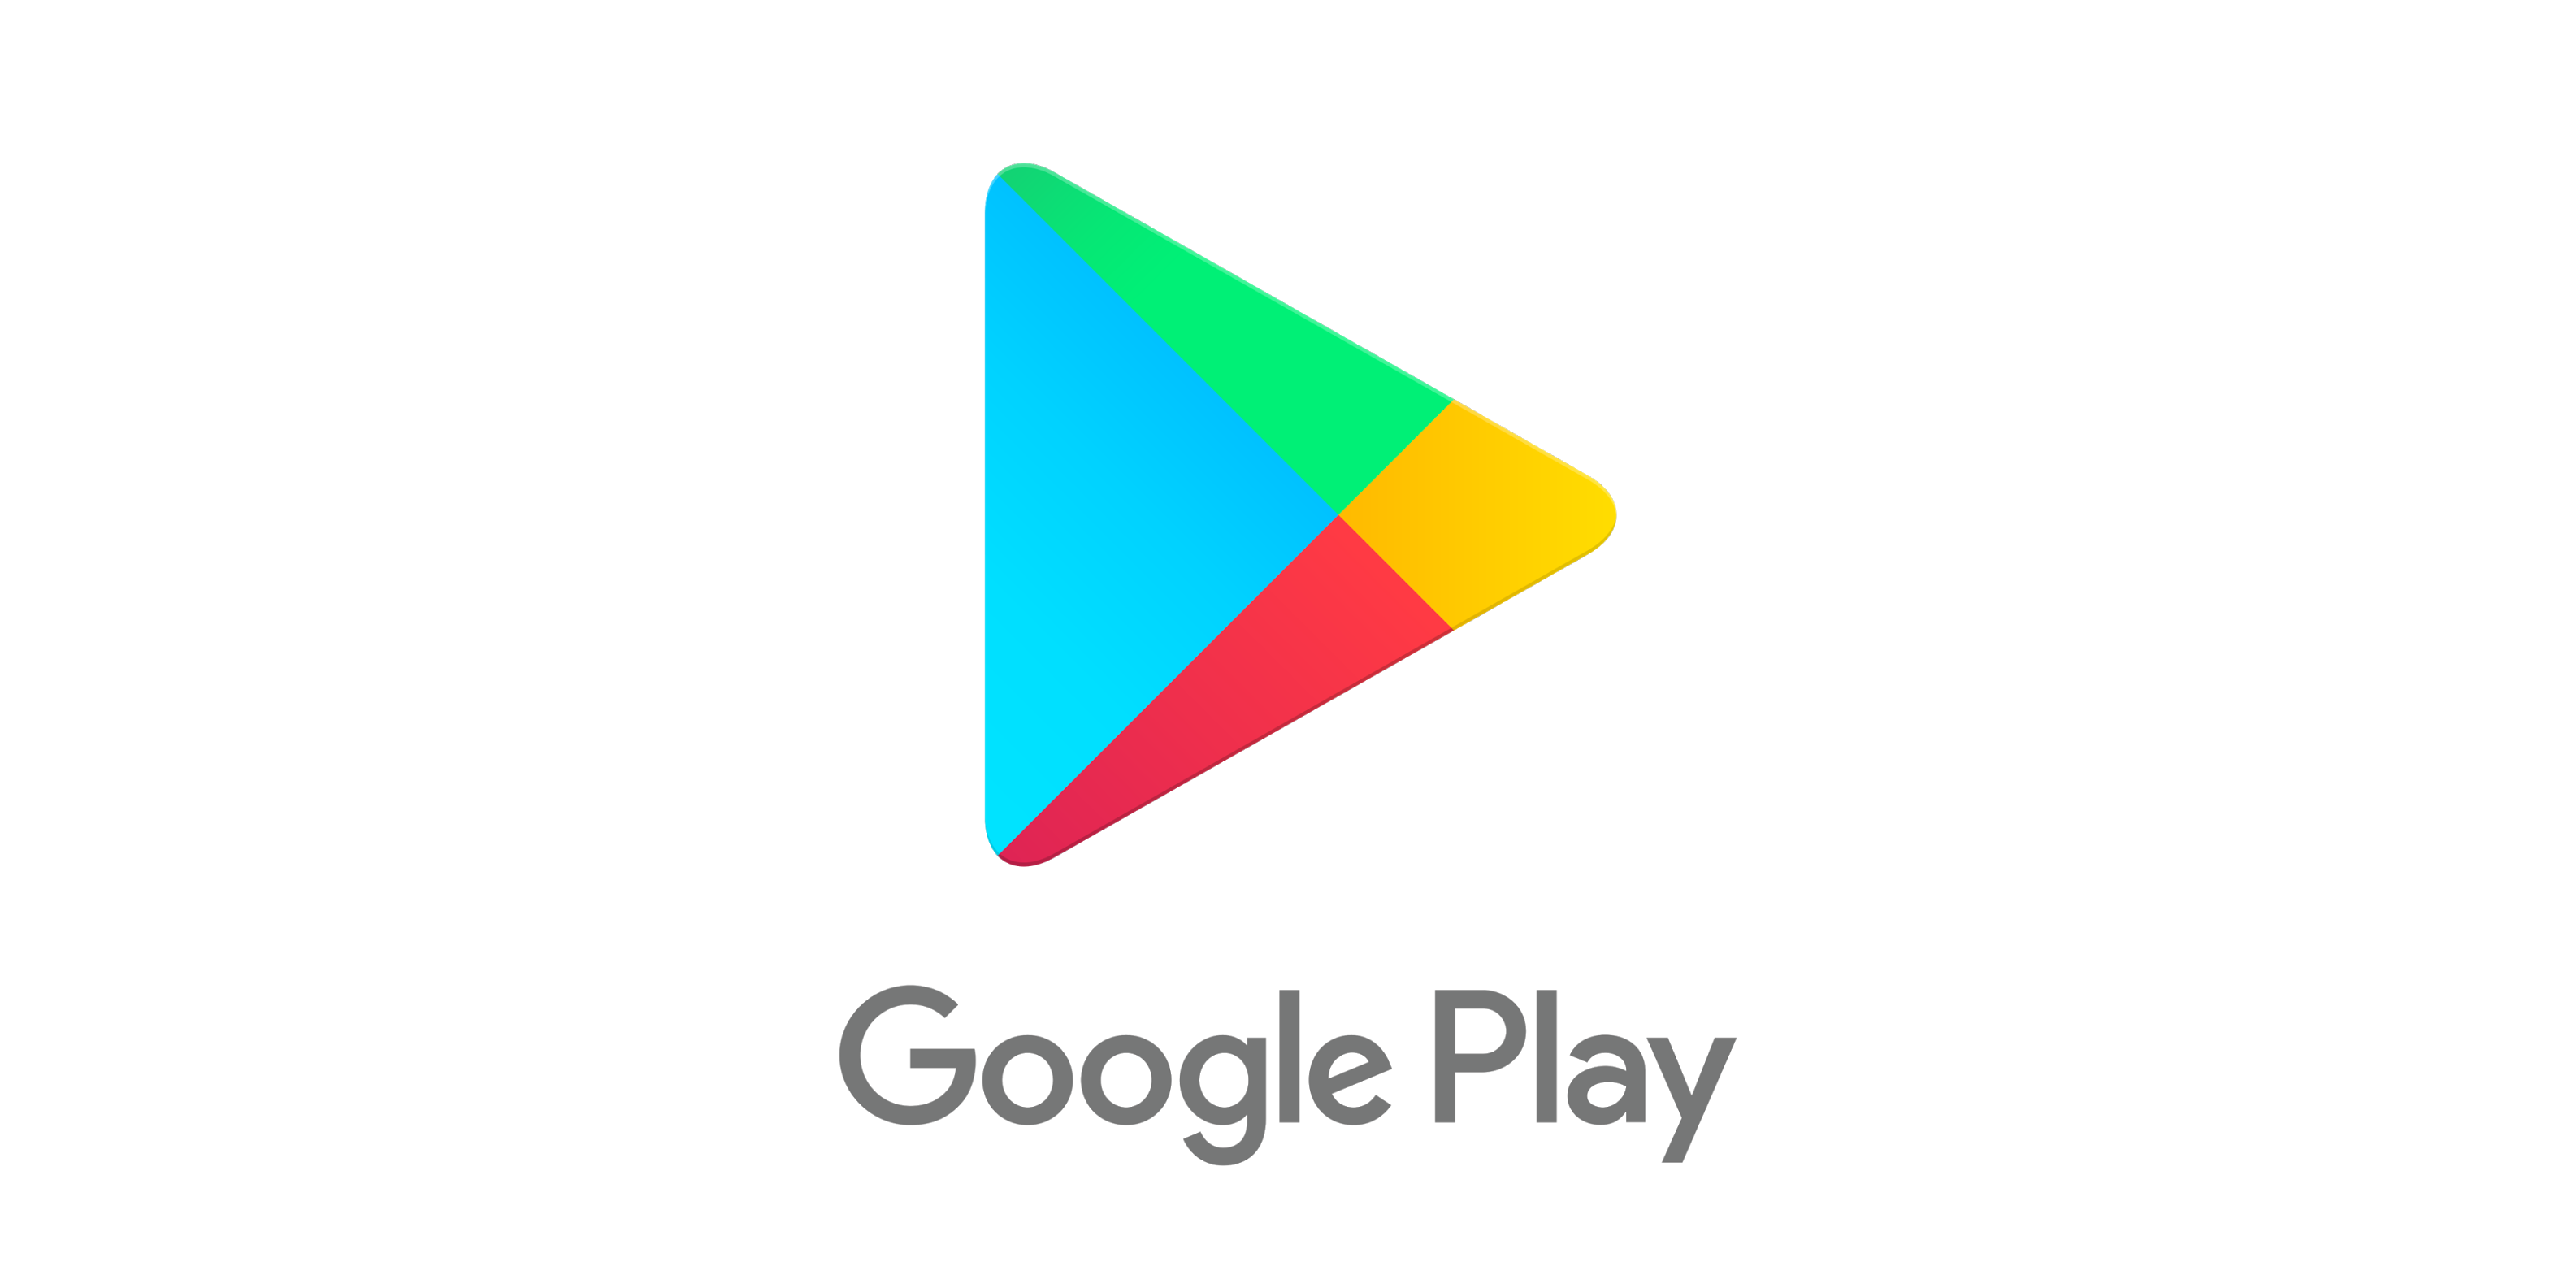 google play store app download for pc windows 10 free